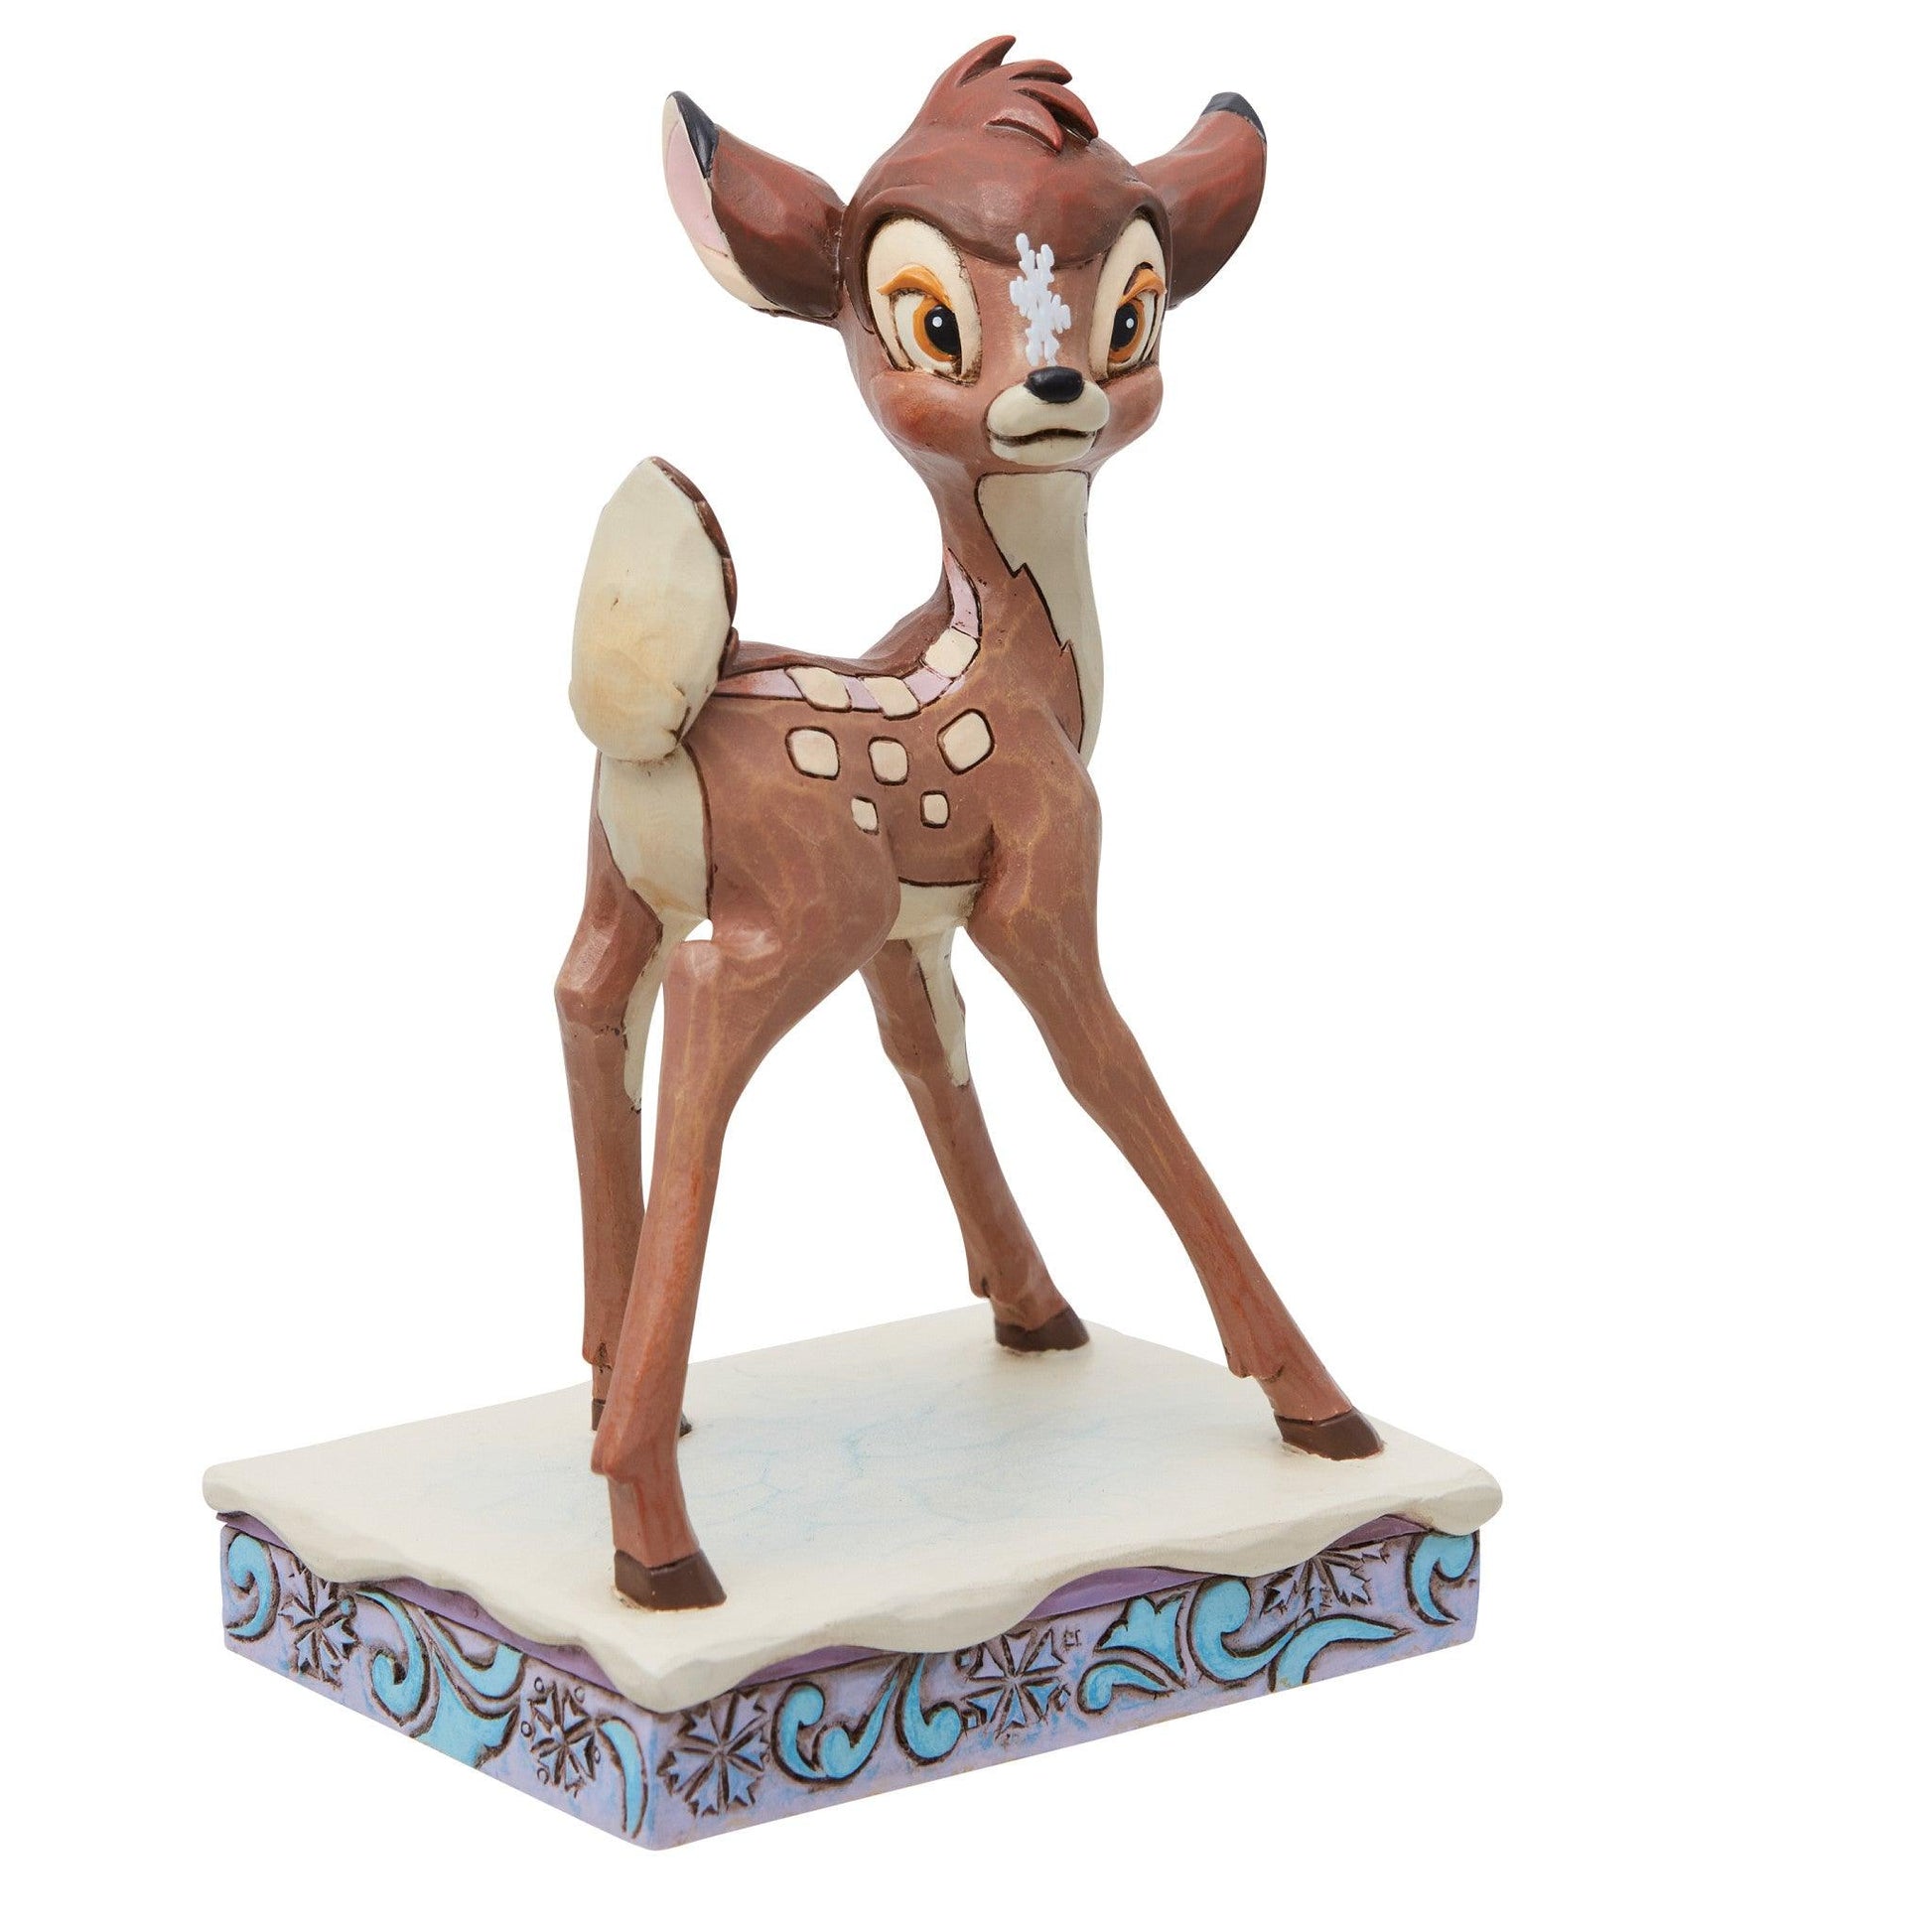 Bambi Christmas Personality Pose Figurine - Gallery Gifts Online 